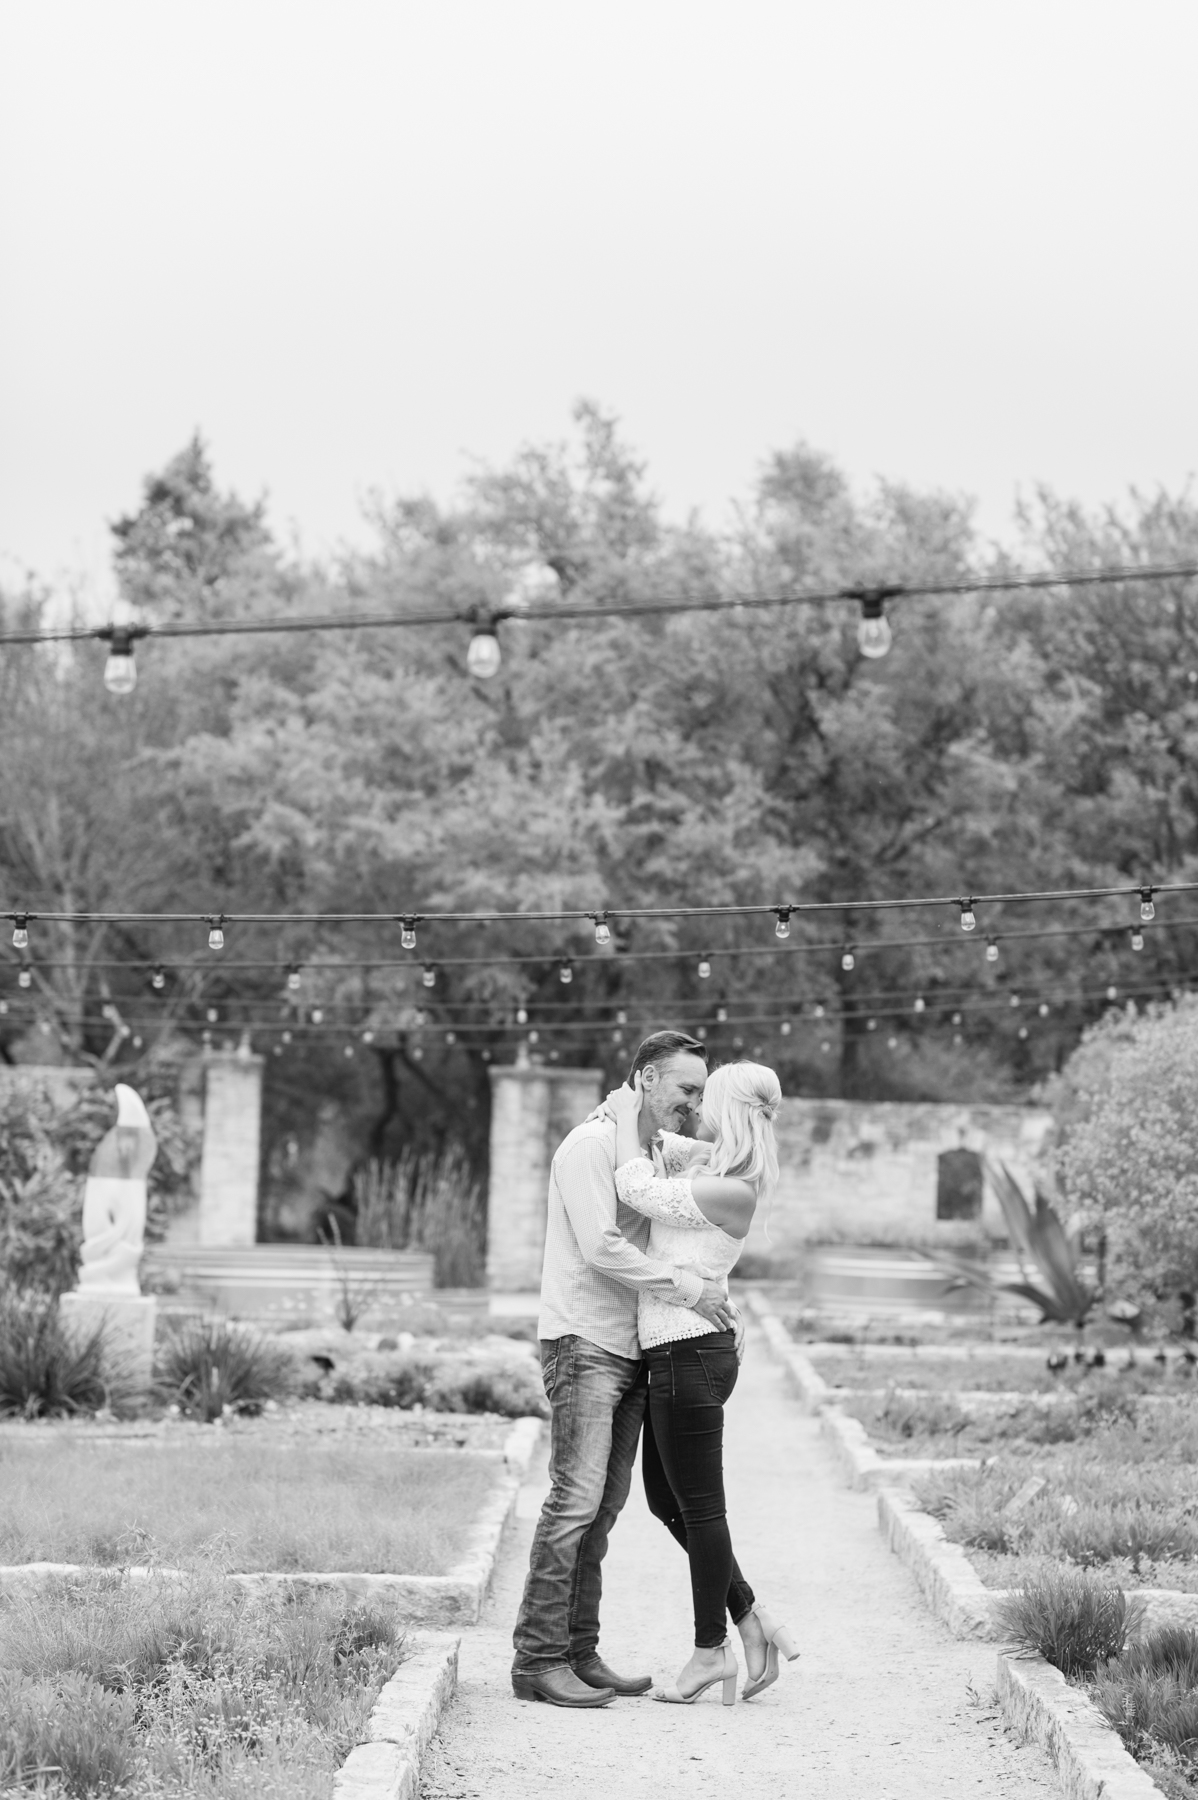 The couple stops under the string lights to embrace each other.